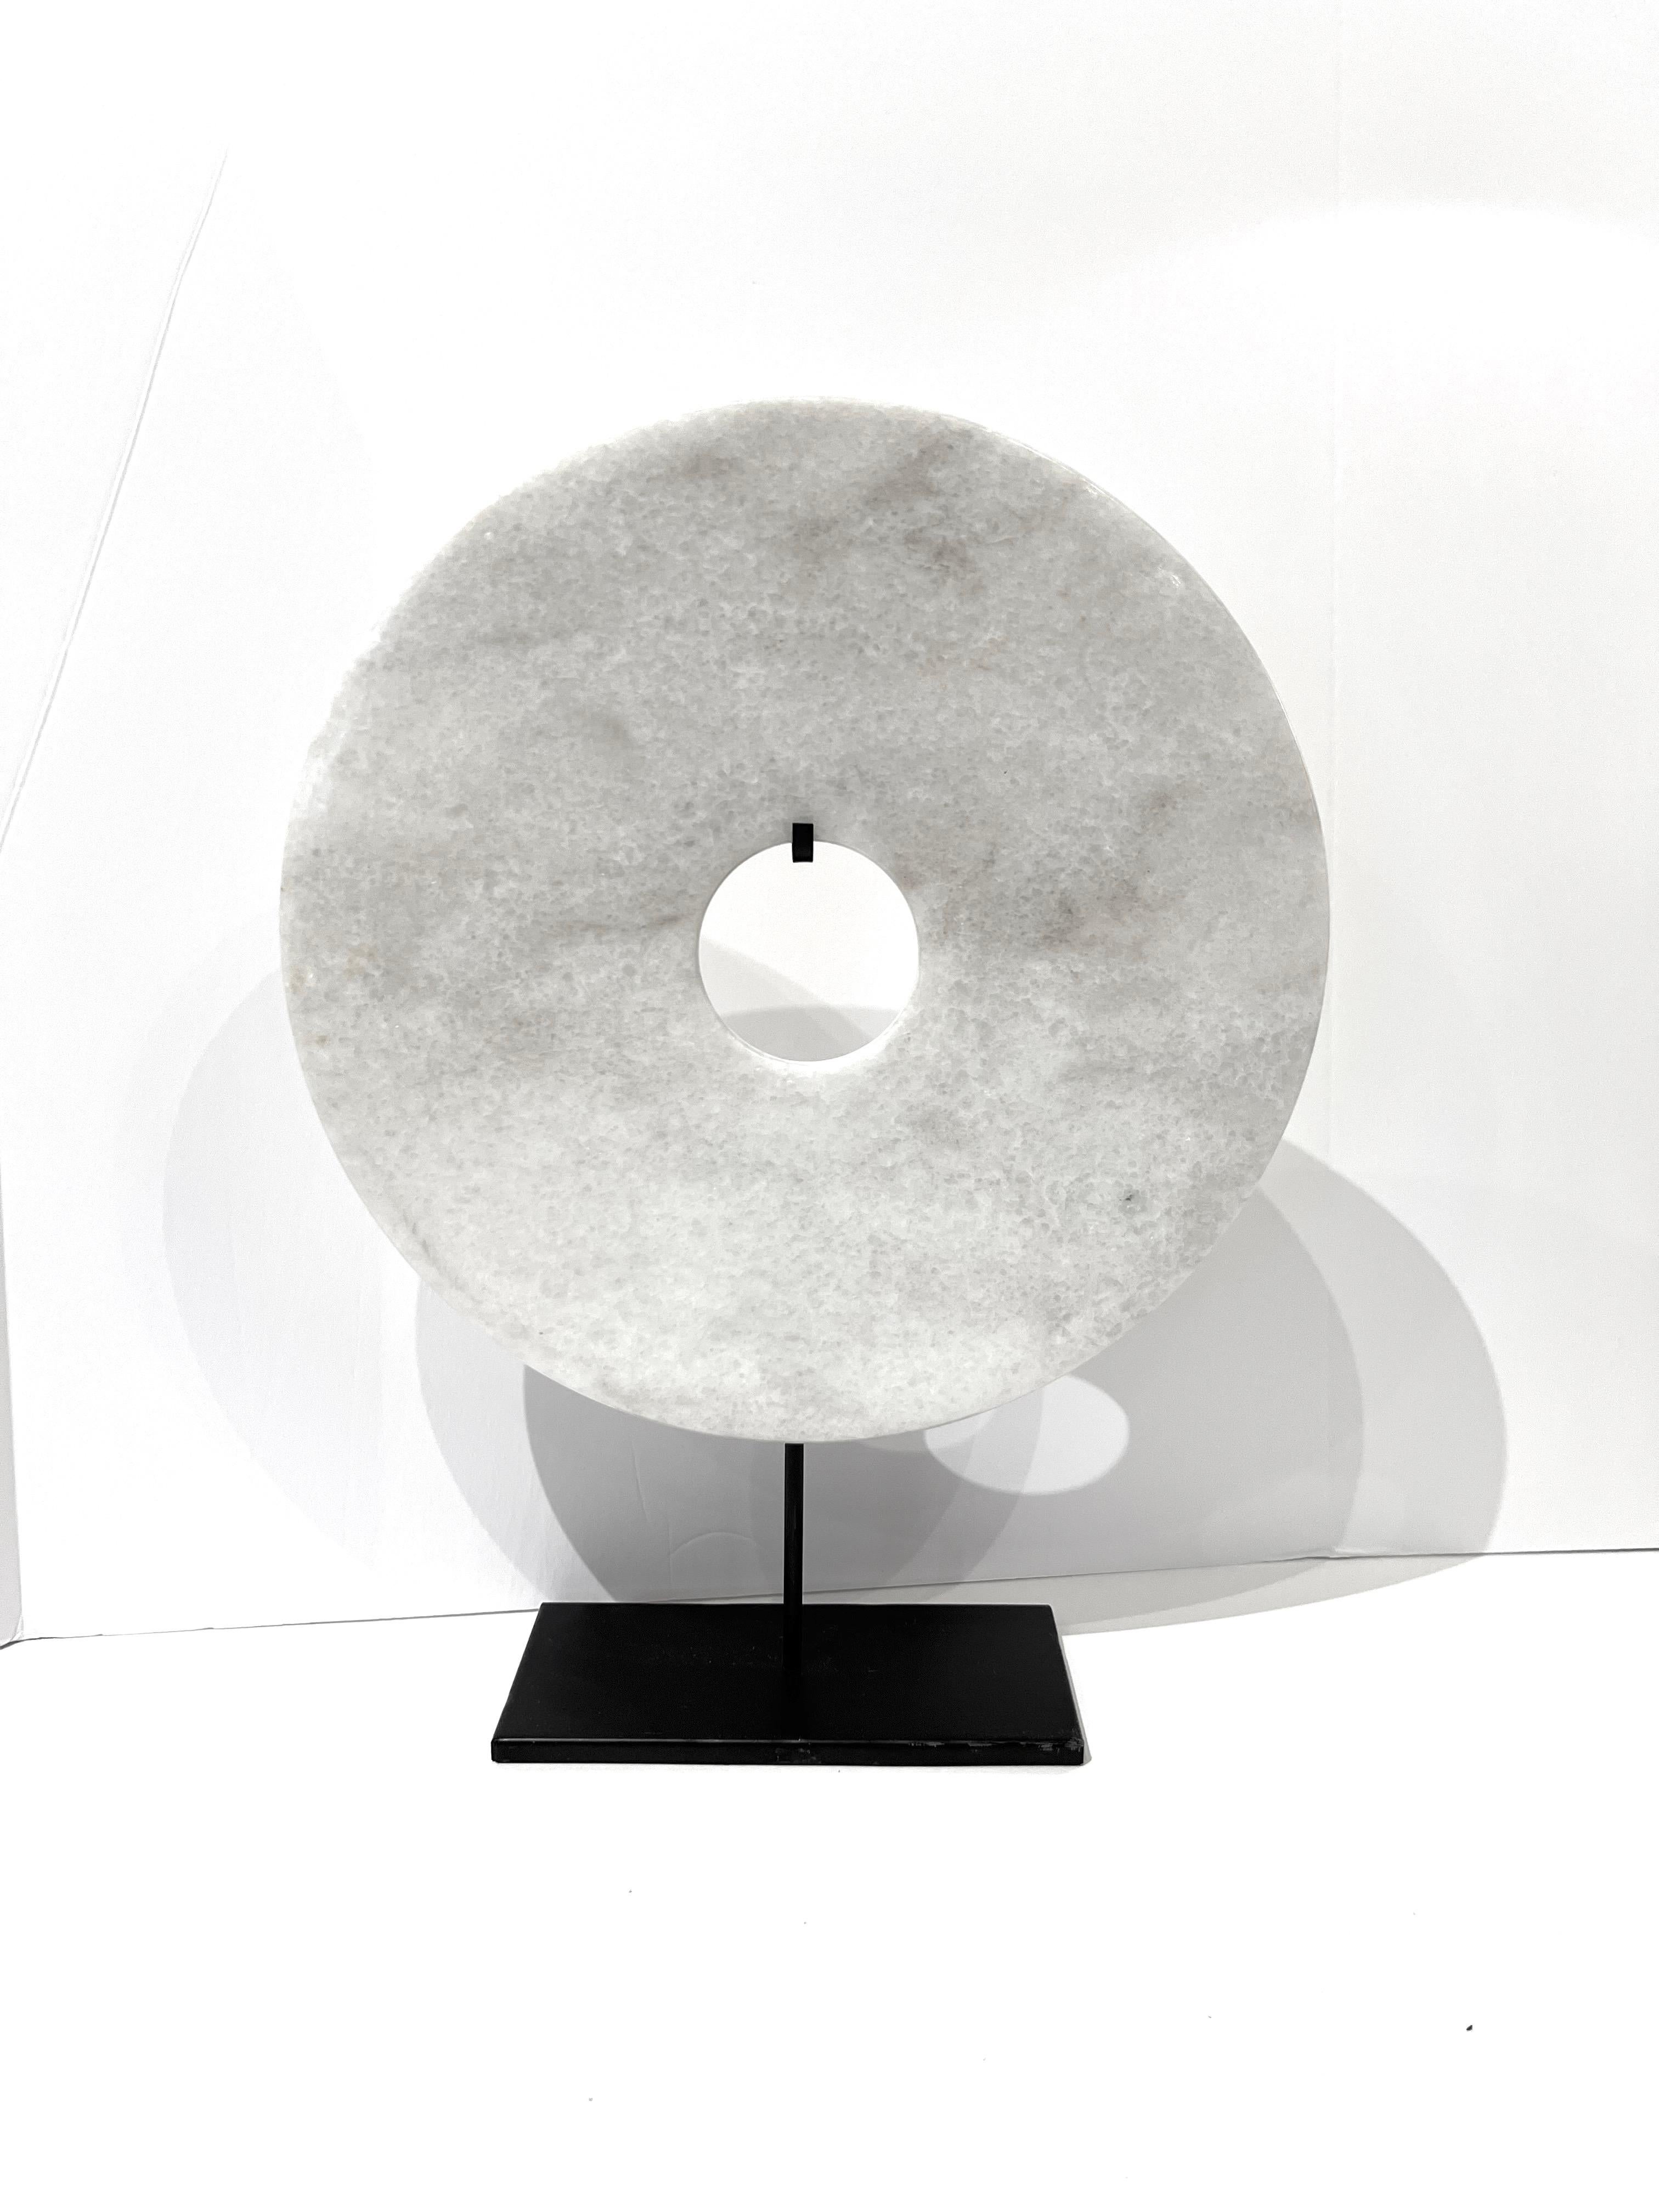 Contemporary Chinese large single smooth white jade disc.
Also available in black (S6452)
Stand measures  9